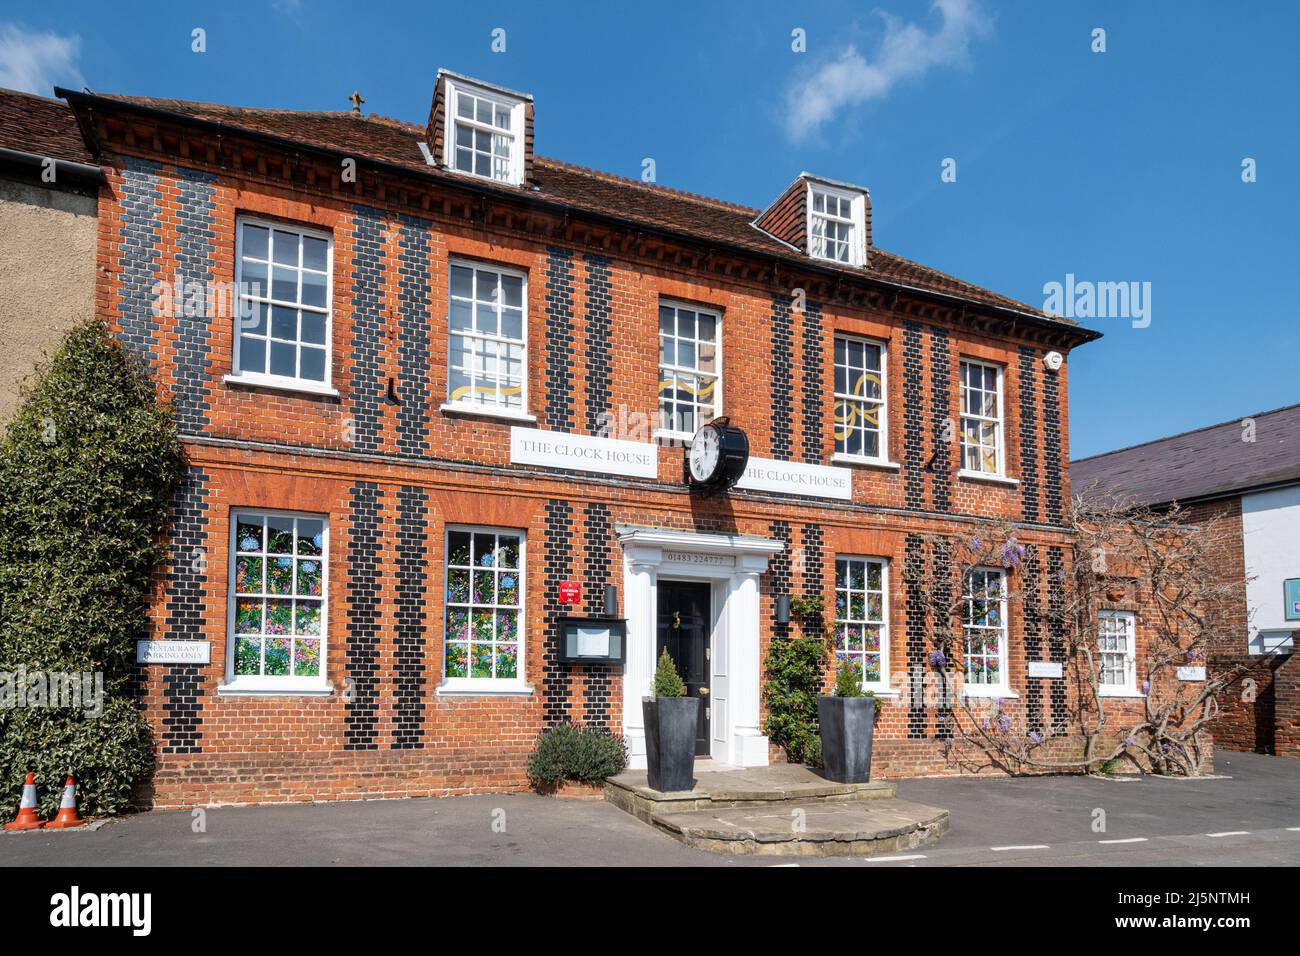 The Clock House, a historic Georgian building now a Michelin starred restaurant, in Ripley village, Surrey, England, UK Stock Photo